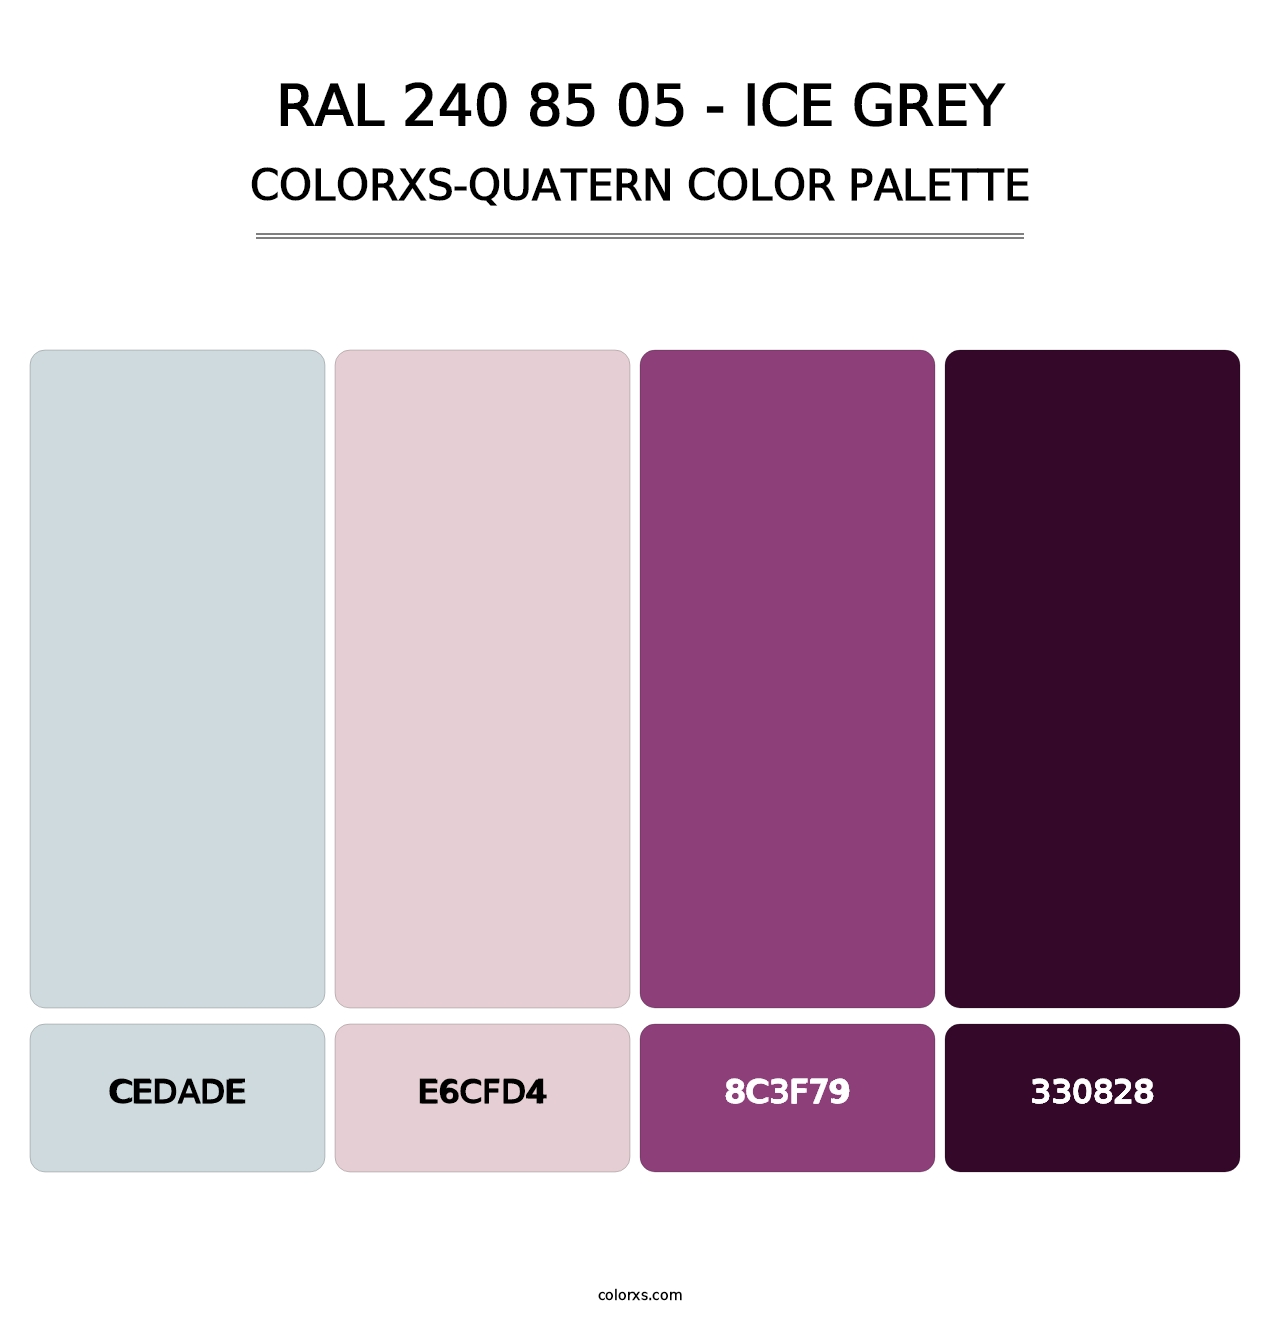 RAL 240 85 05 - Ice Grey - Colorxs Quatern Palette